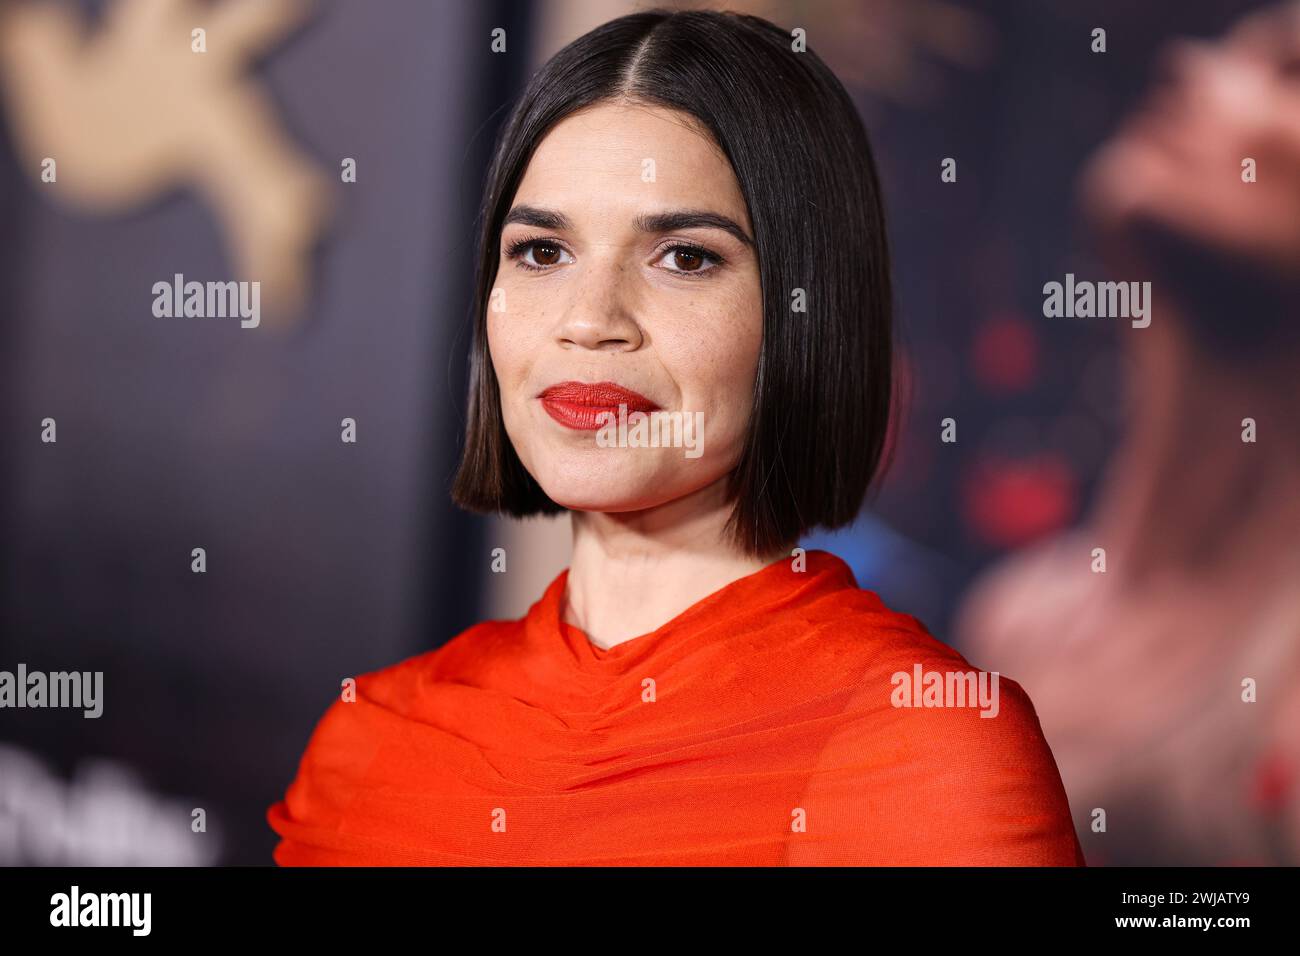 HOLLYWOOD, LOS ANGELES, KALIFORNIEN, USA - 13. FEBRUAR: America Ferrera kommt zur Los Angeles Premiere von Amazon MGM Studios' This Is Me... Now: A Love Story', die am 13. Februar 2024 im Dolby Theatre in Hollywood, Los Angeles, Kalifornien, USA stattfindet. (Foto: Xavier Collin/Image Press Agency) Stockfoto